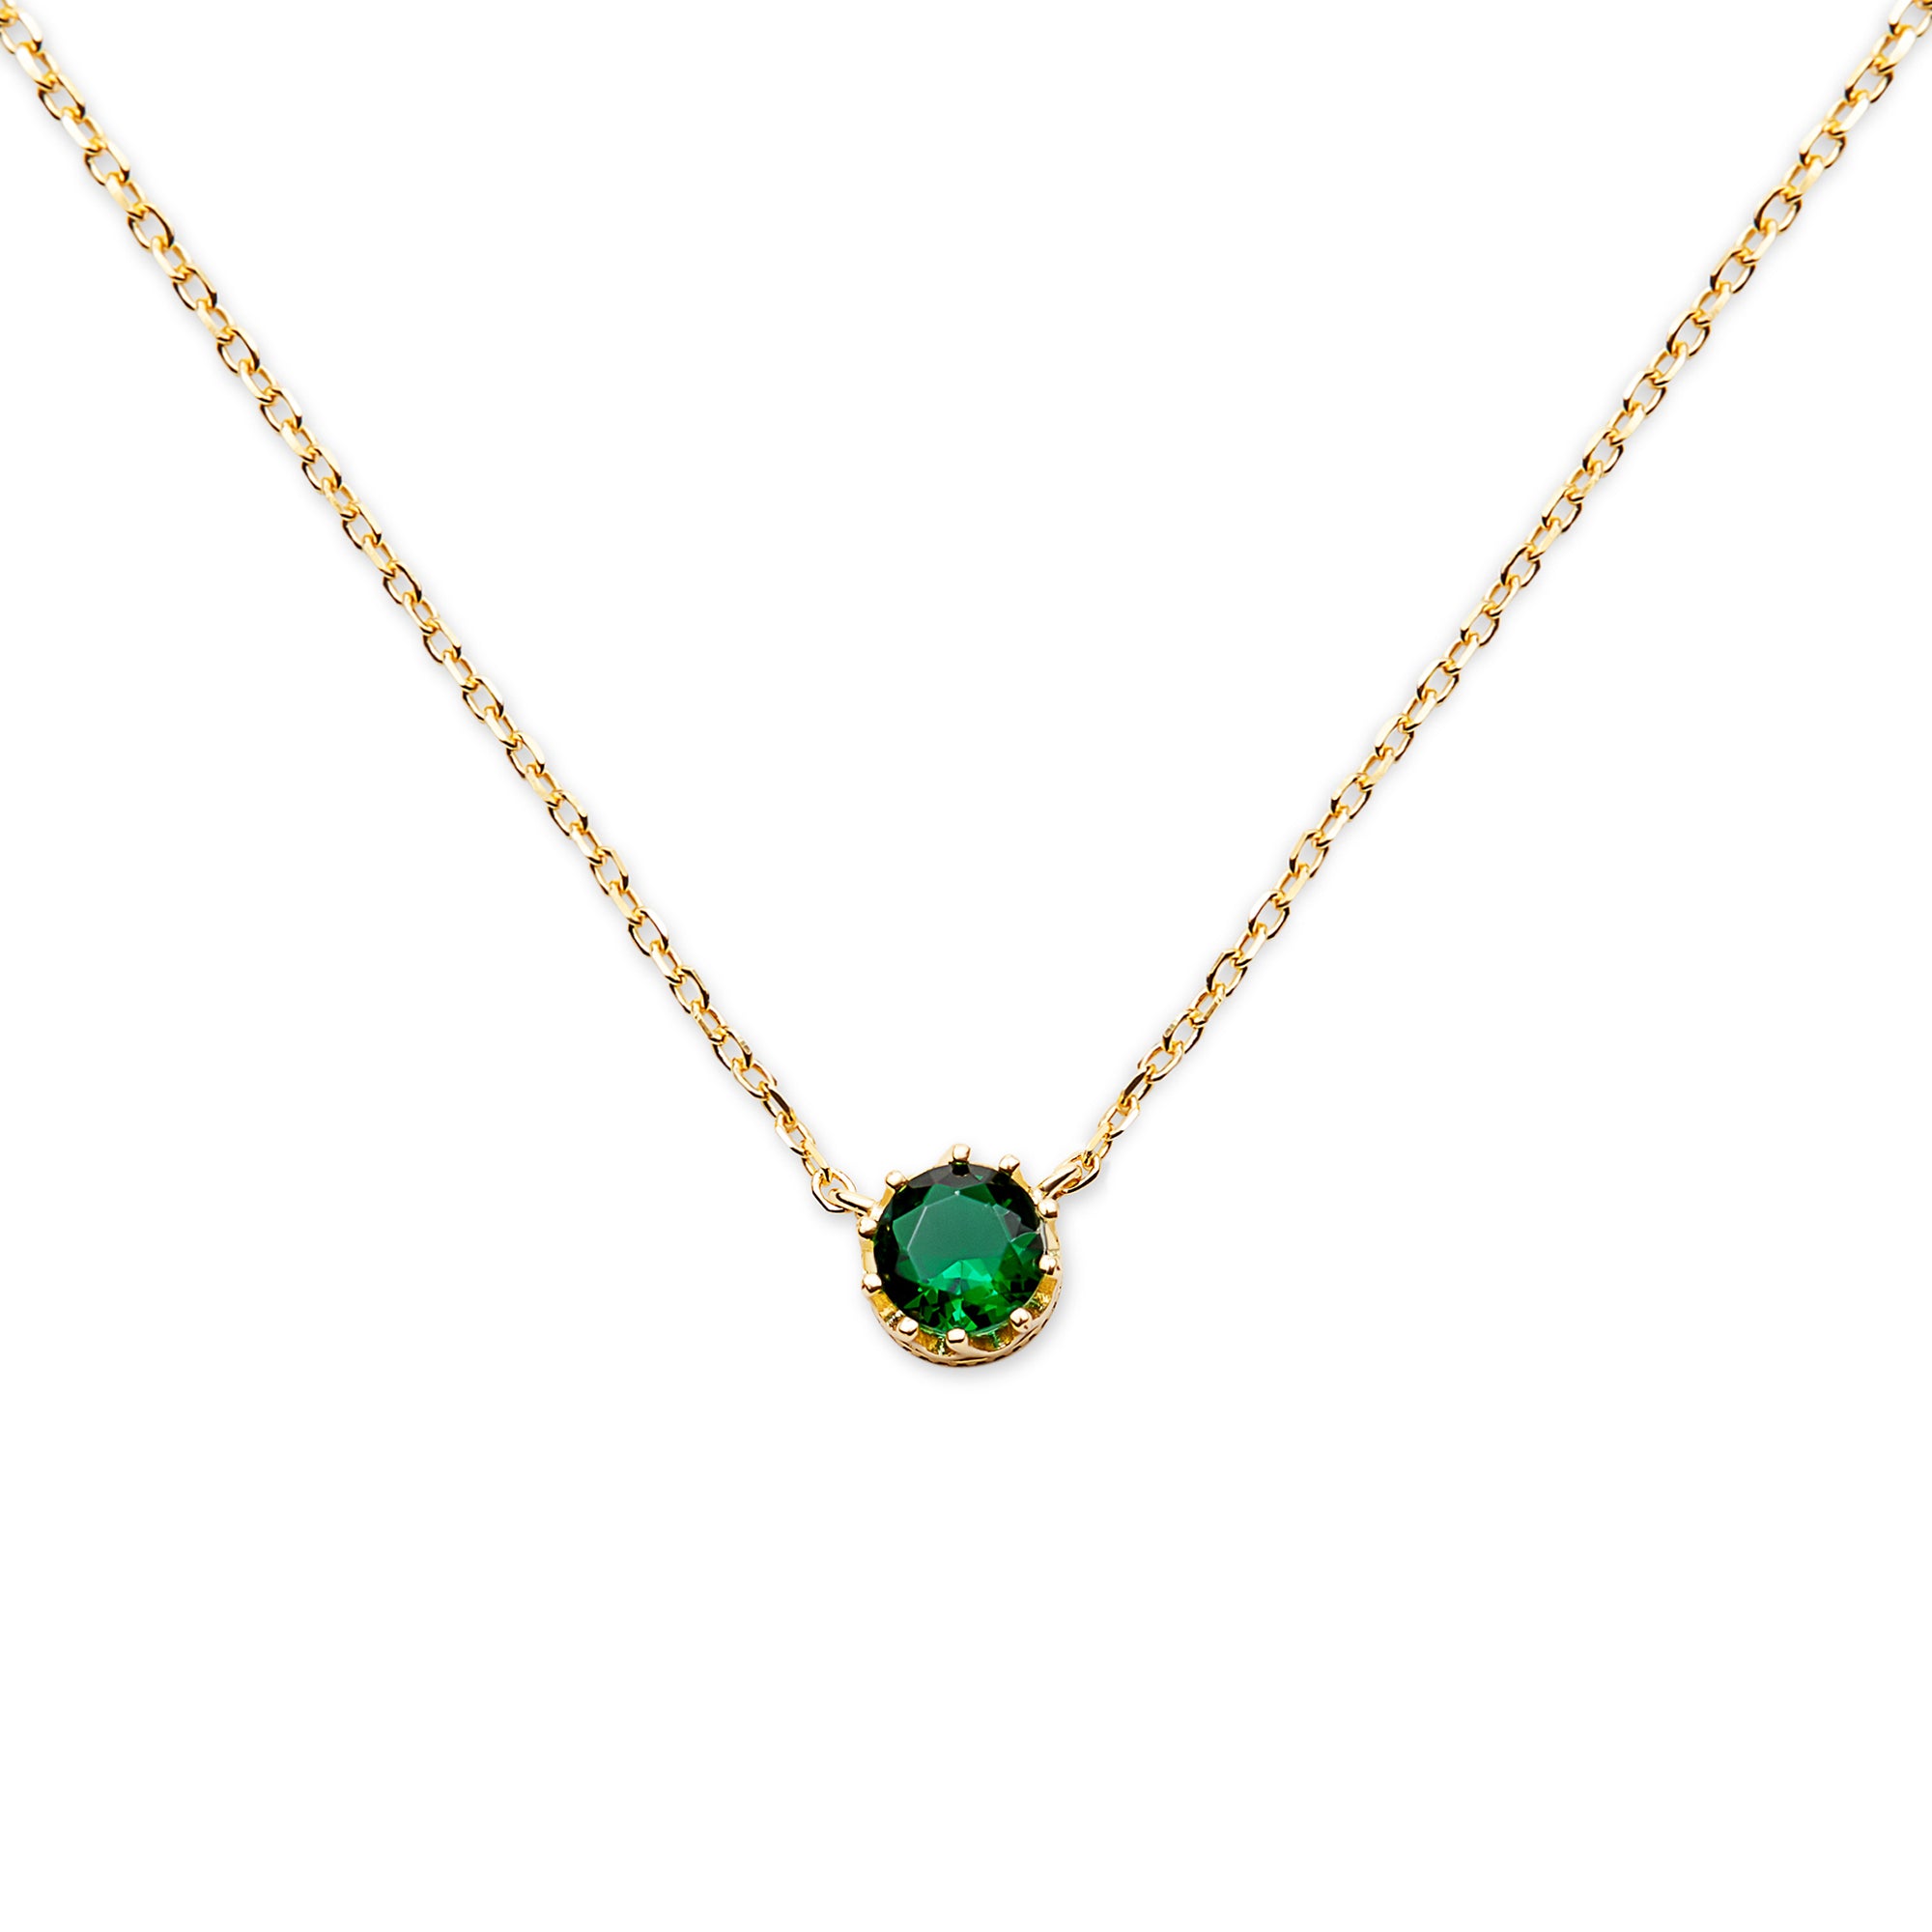 For Sale: Tiny Emerald Necklace - Small Emerald Faceted Teardrop...